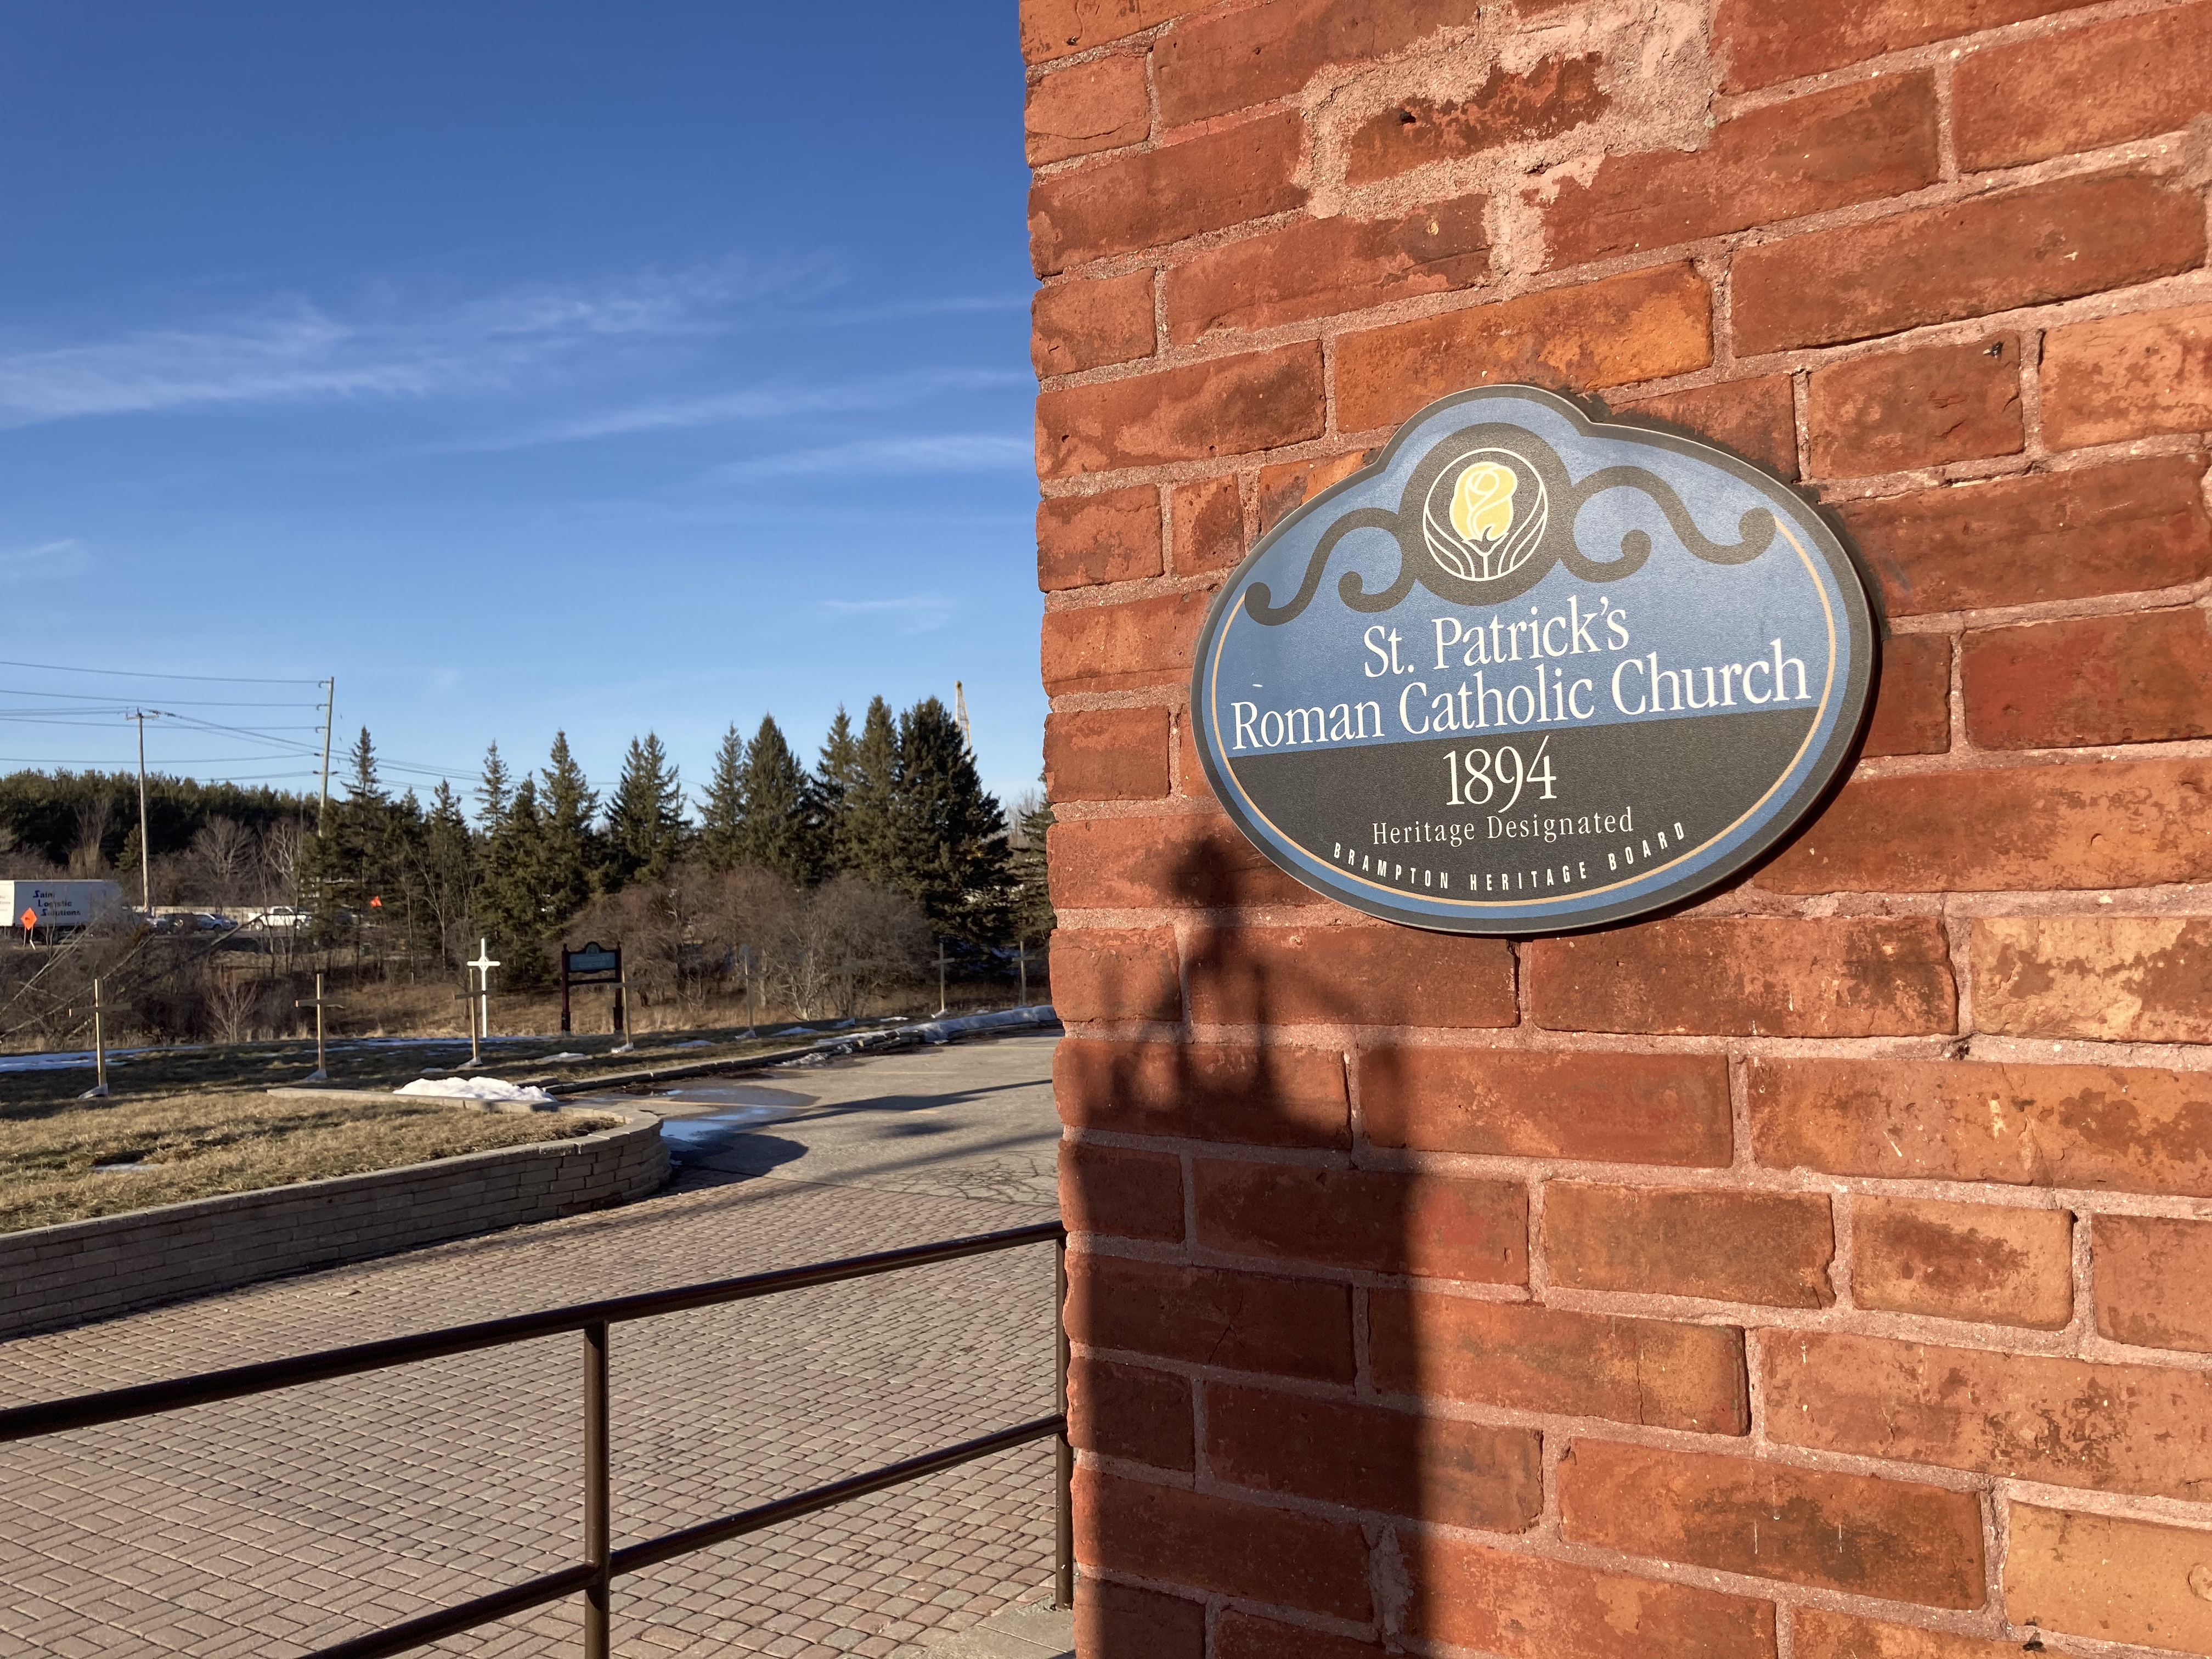 Photo of Brampton historical site sign located at front of church building on a red brick wall